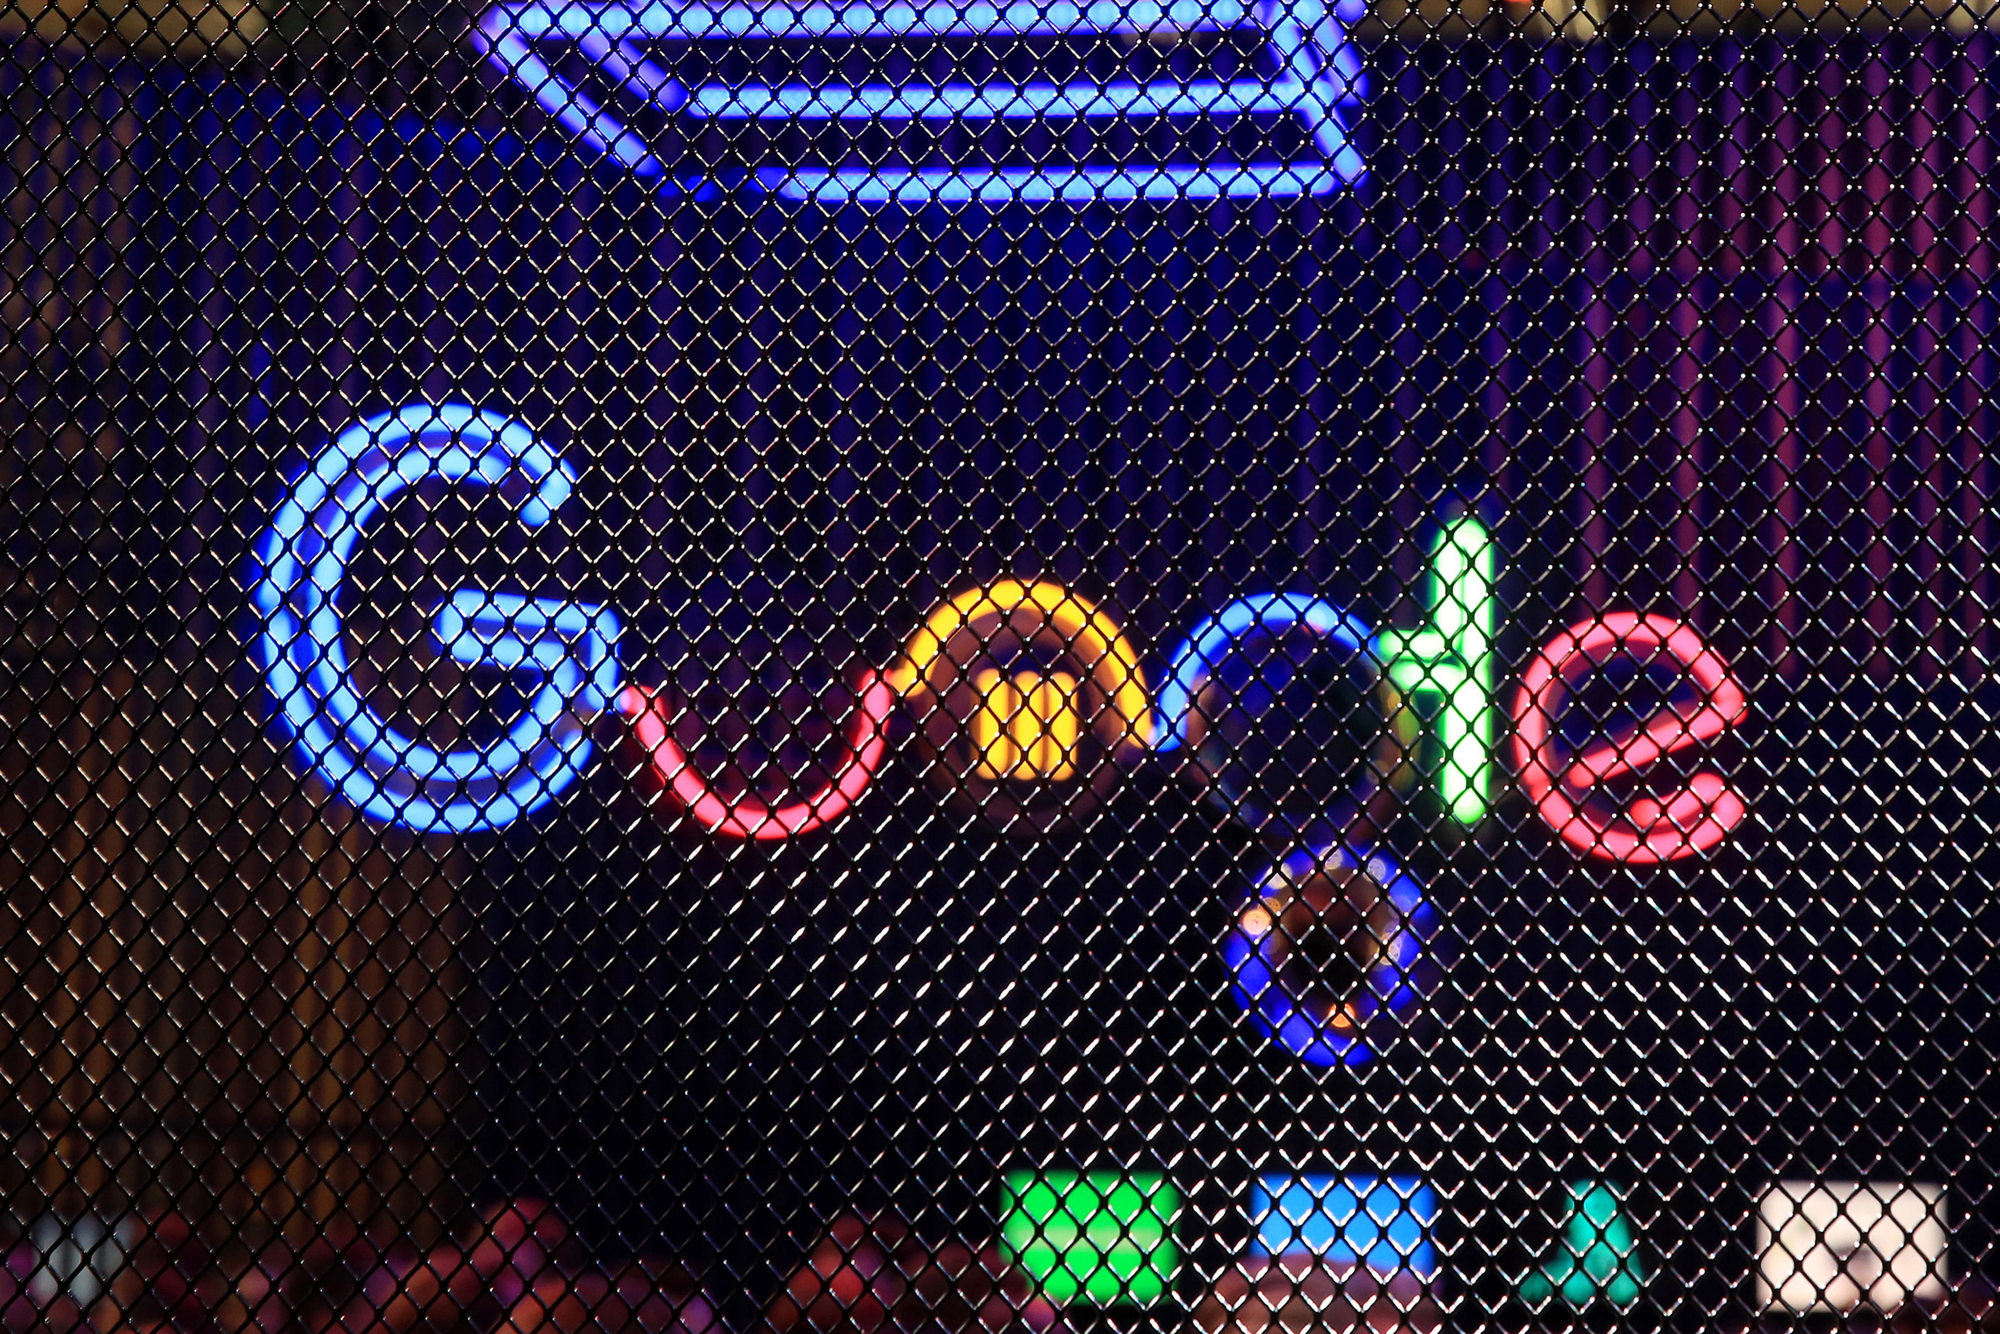 The Google Inc. logo hangs illuminated at the company's exhibition stand at the Dmexco digital marketing conference in Cologne, Germany.